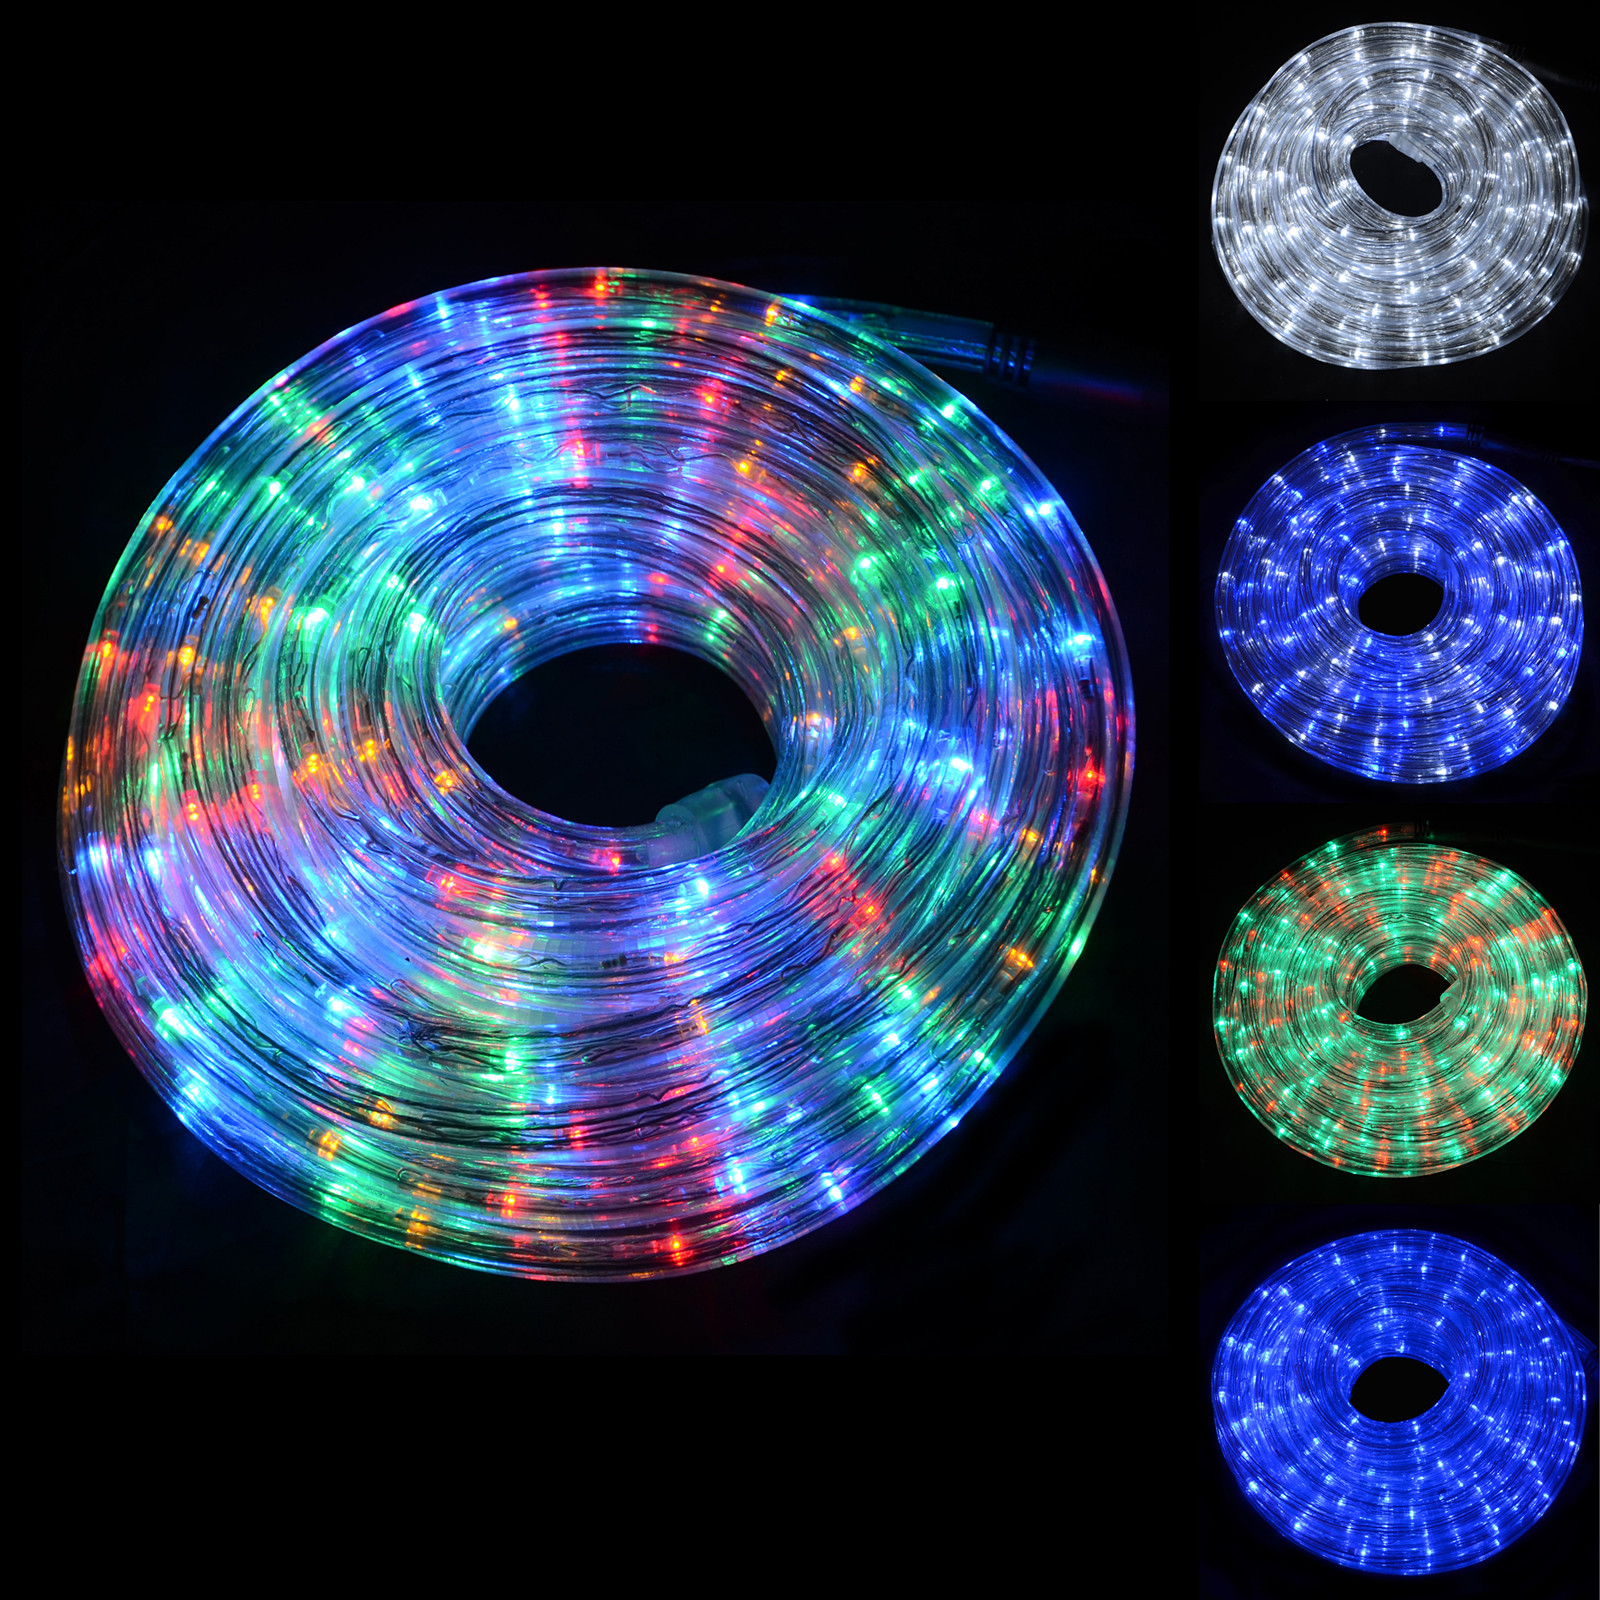 Indoor Led Christmas Lights
 Super Bright LED Chasing Rope Lights Christmas Xmas Indoor